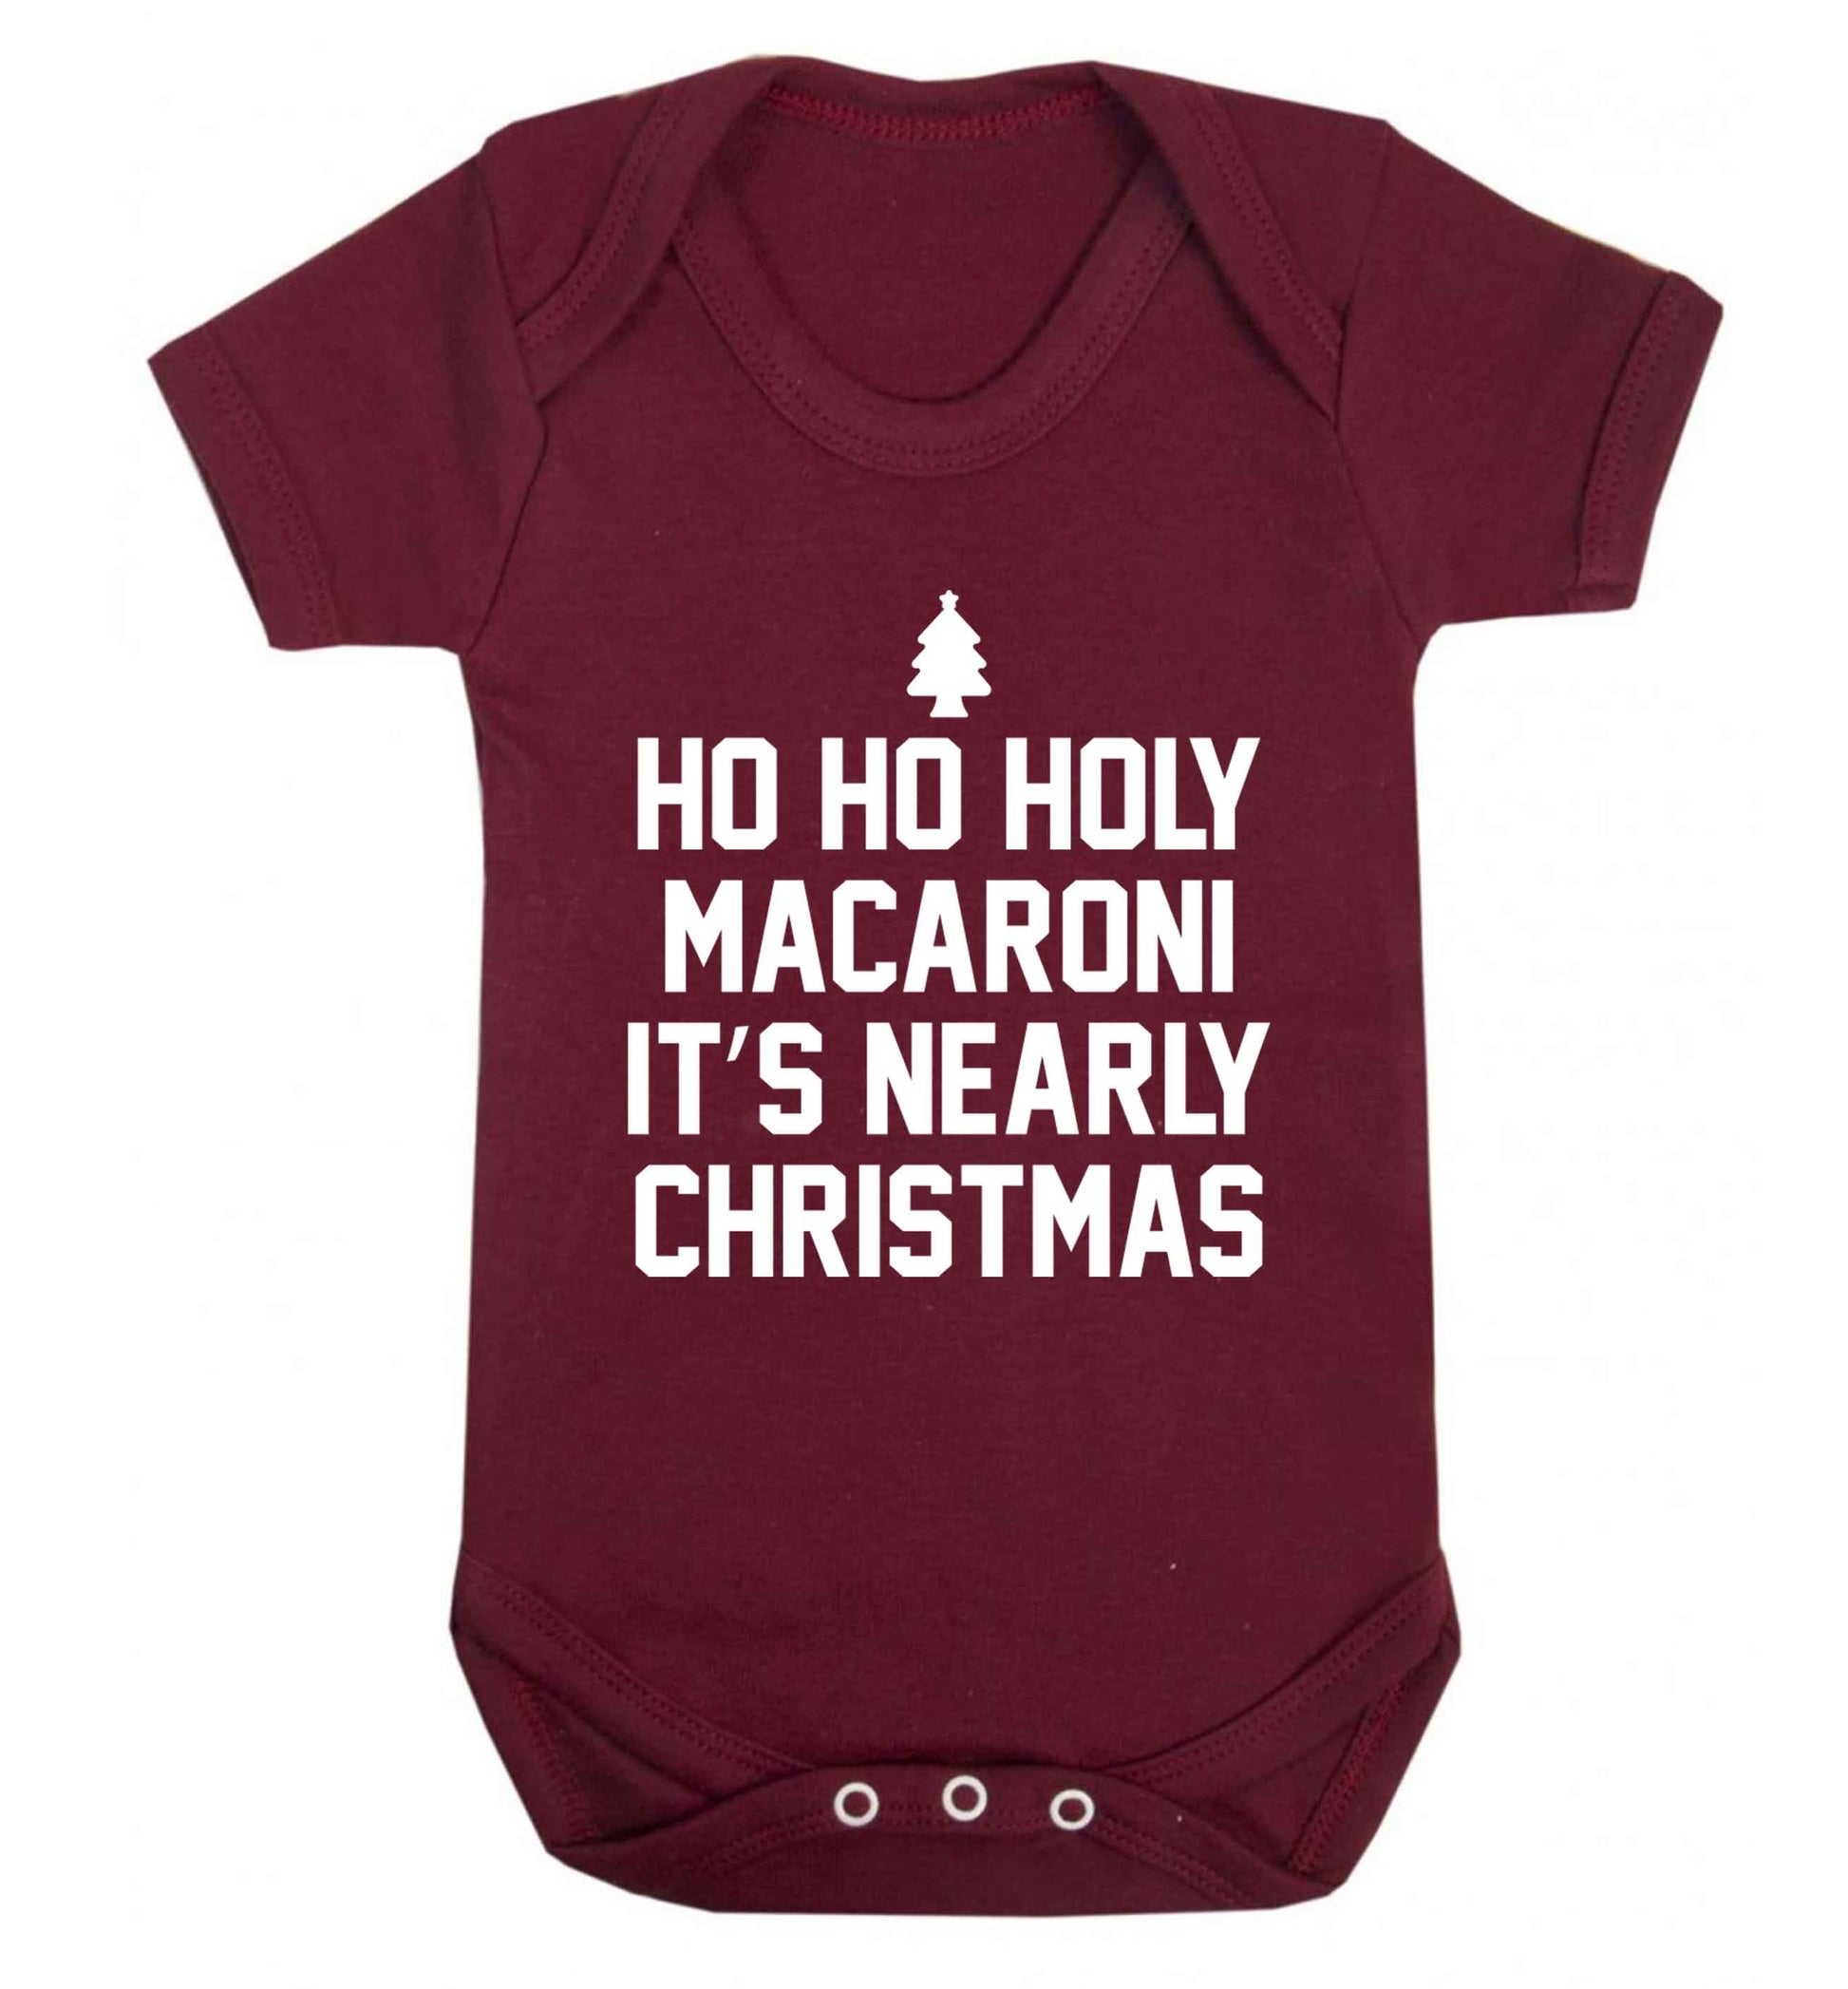 Ho ho holy macaroni it's nearly Christmas Baby Vest maroon 18-24 months